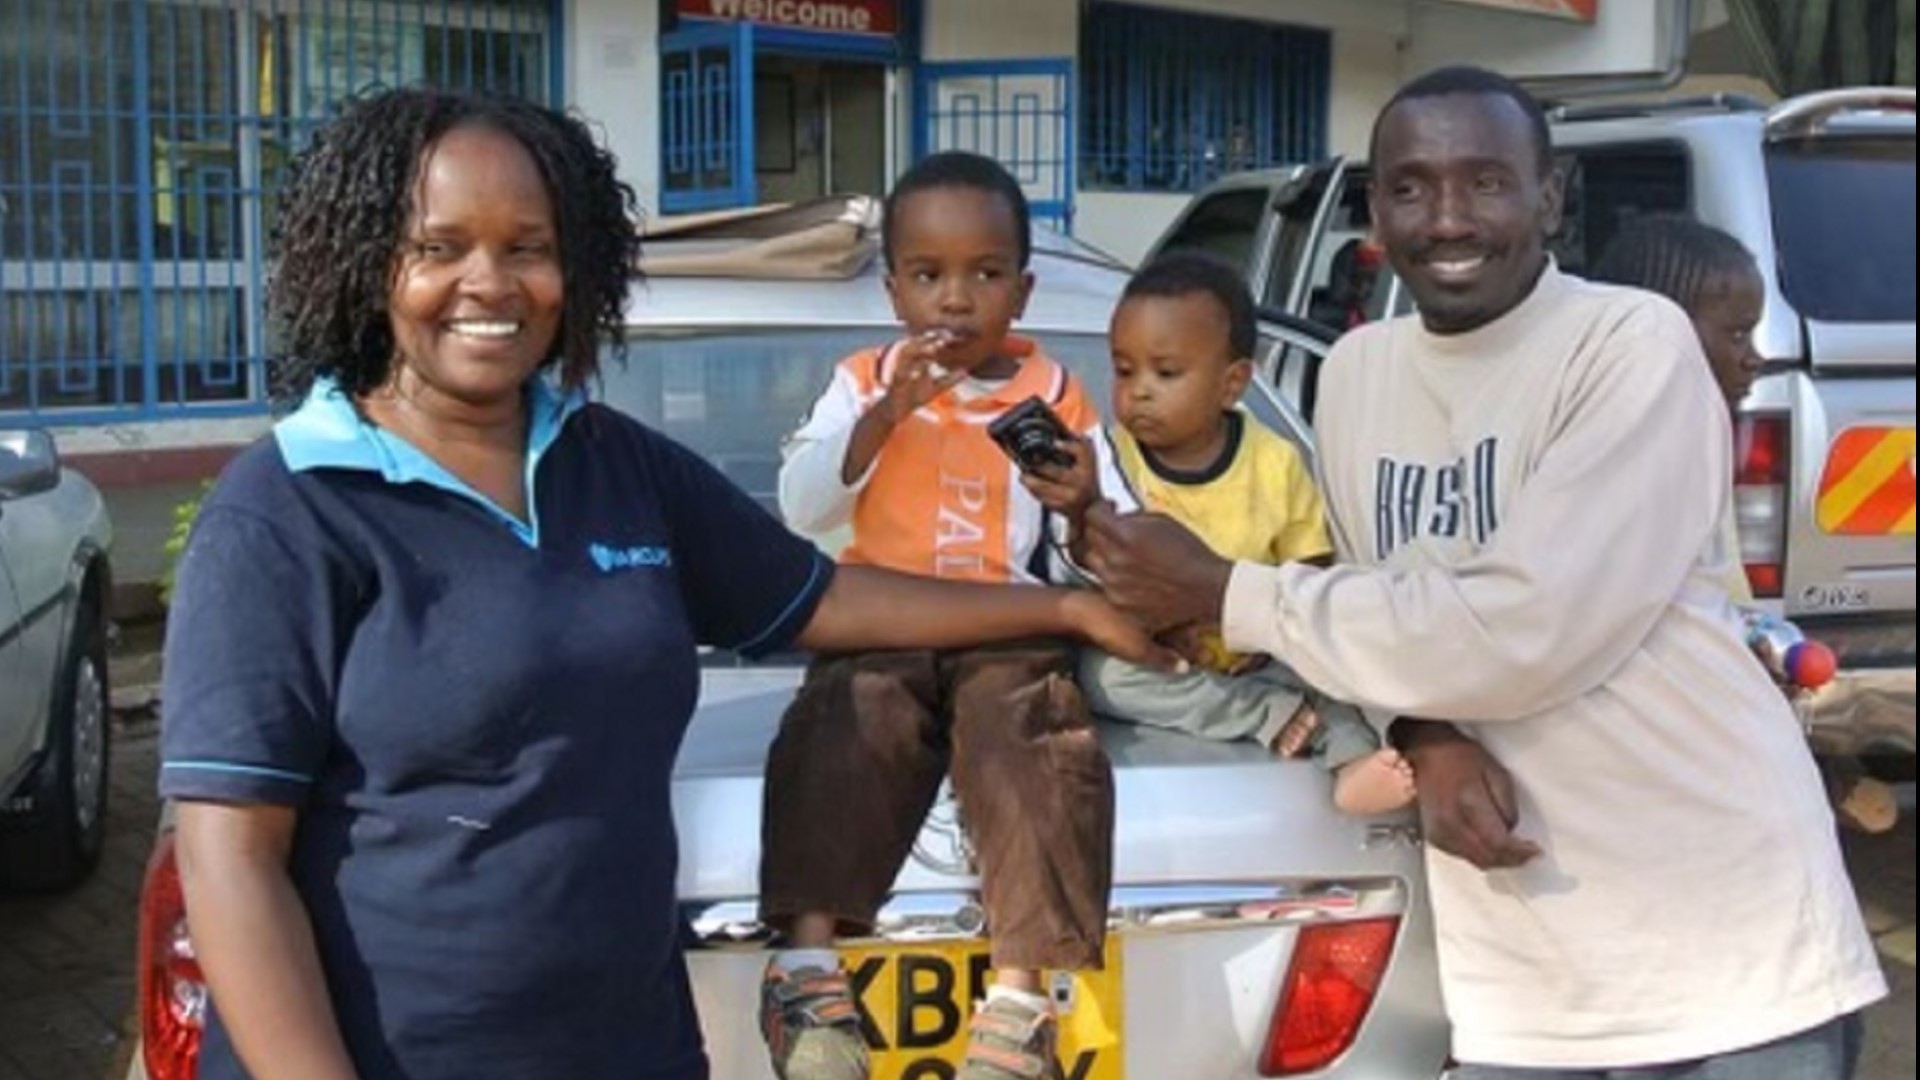 A family from Kisii, Kenya said they thought they were out of options when medications weren’t stopping their ten-year-old son’s epileptic seizures.